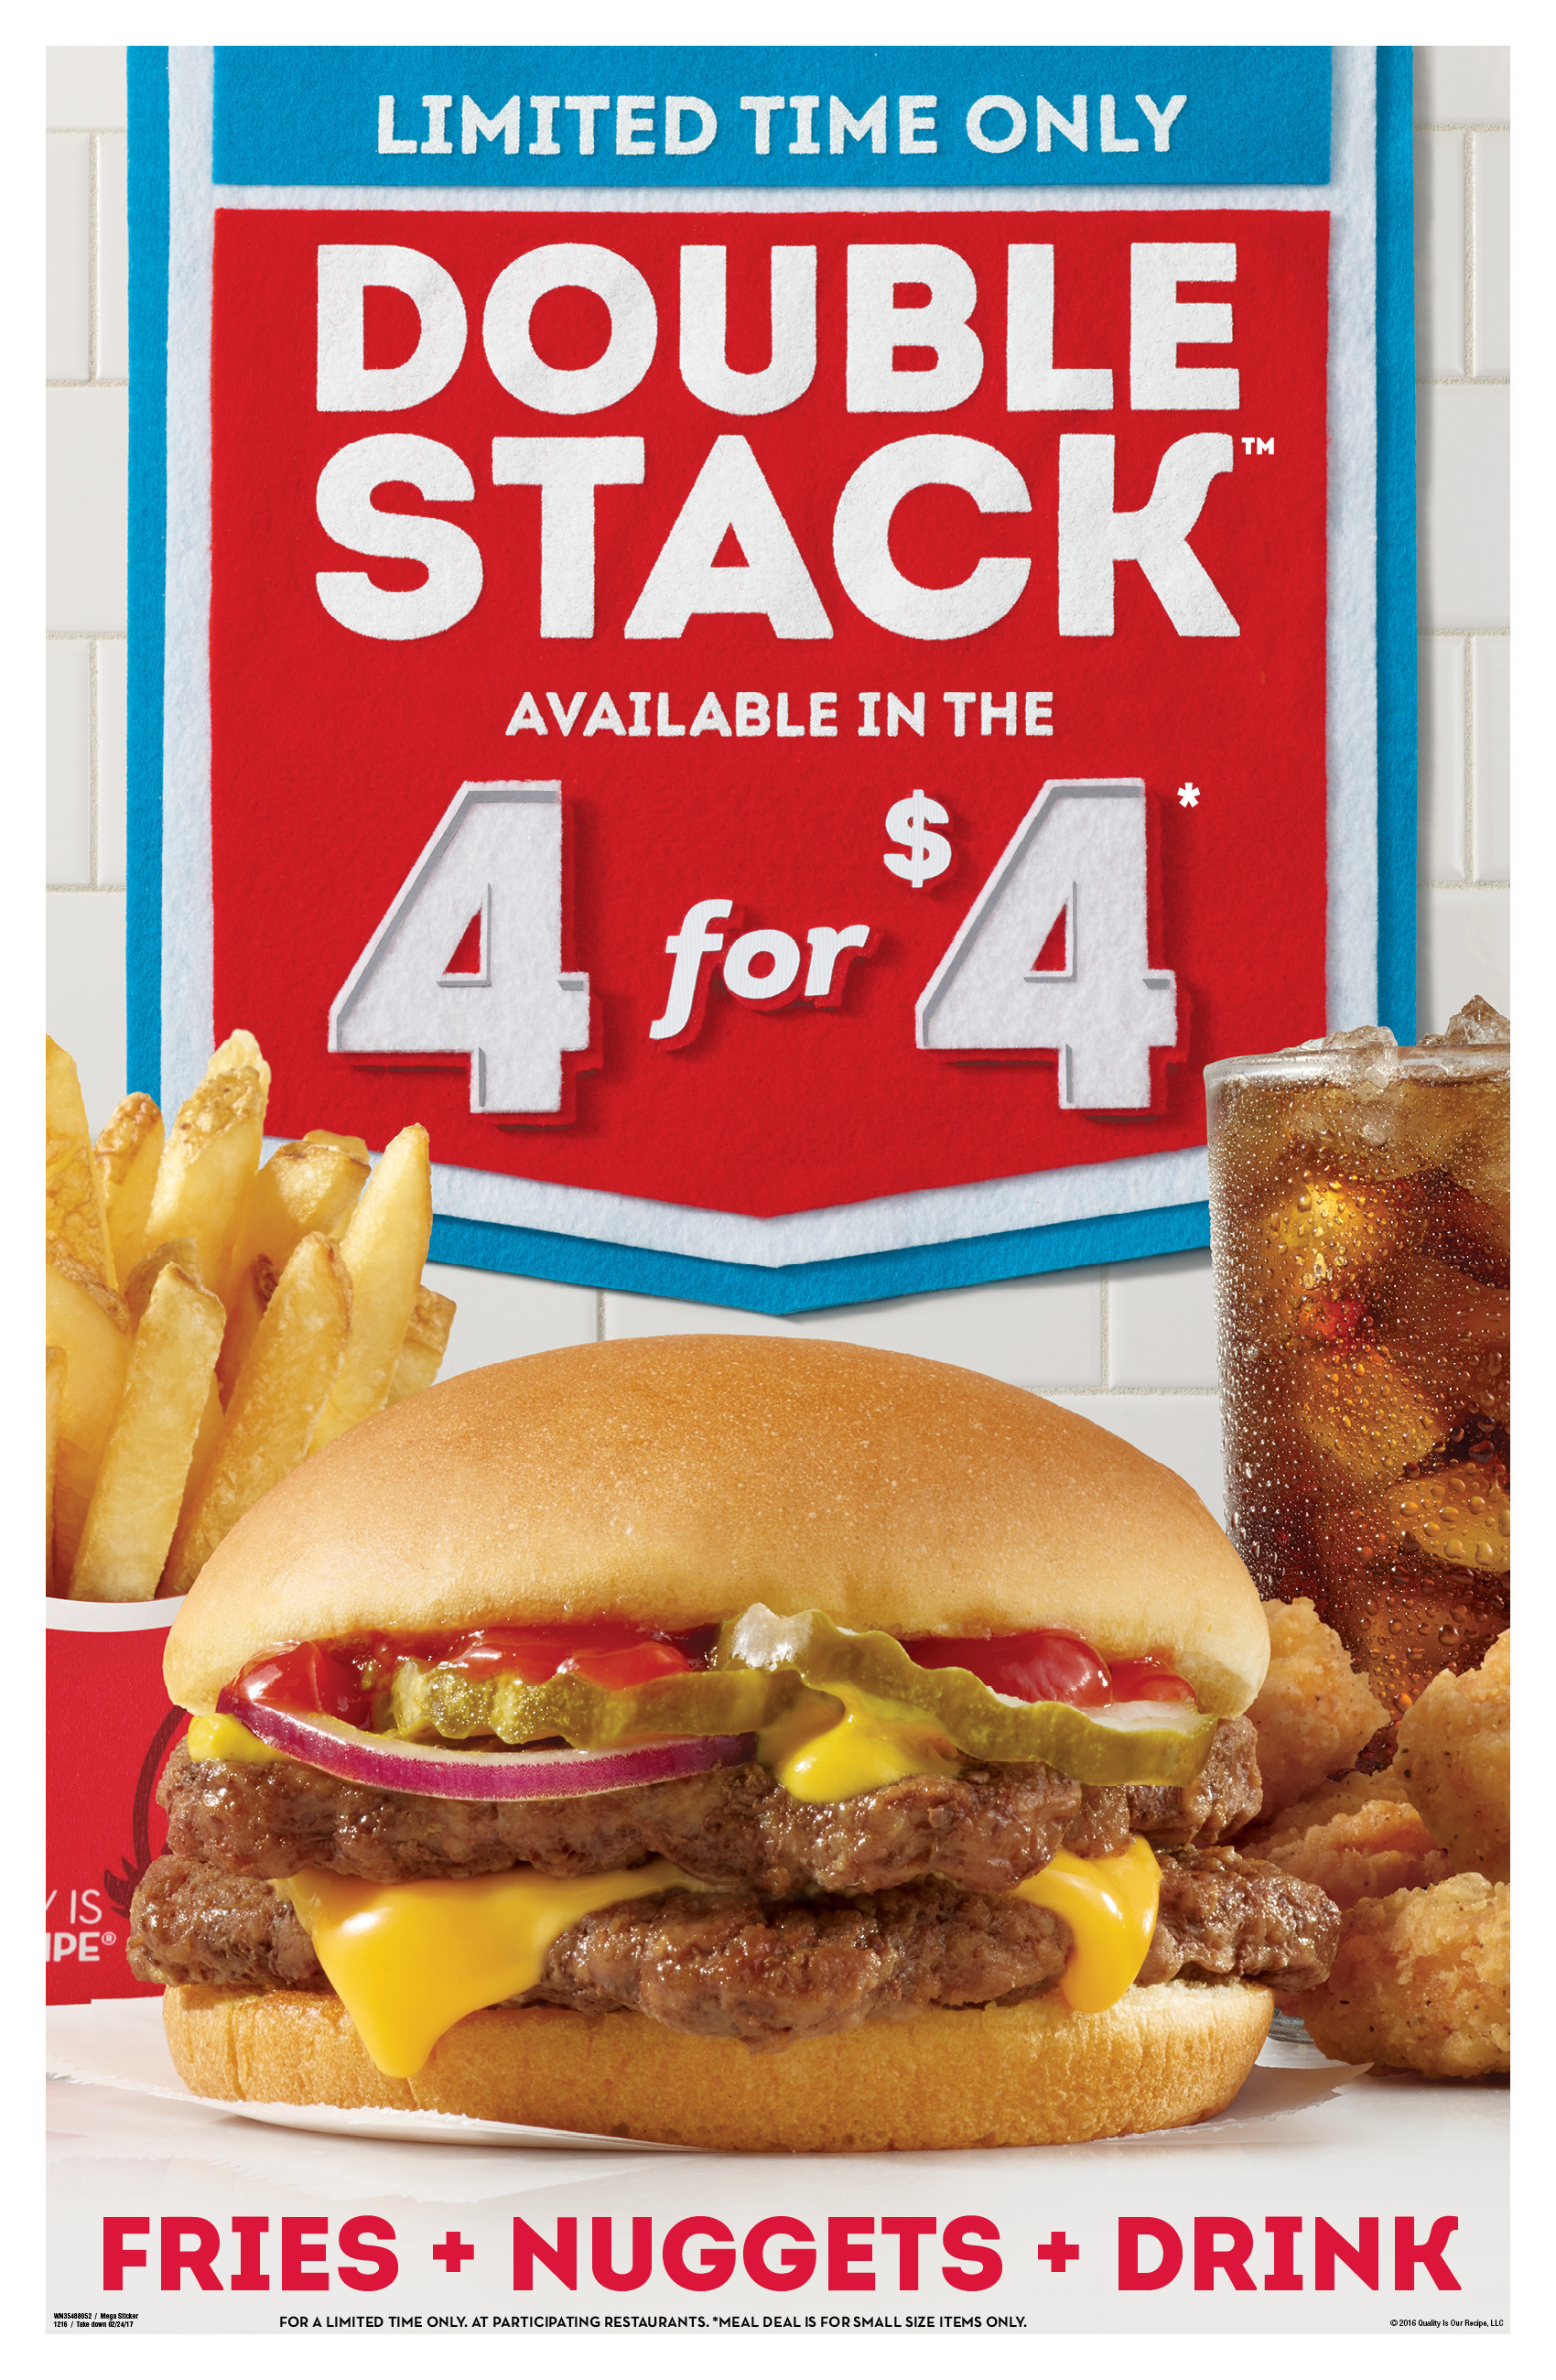 How are y'all gonna call it the 4 for $4 meal when it's $5 : r/wendys